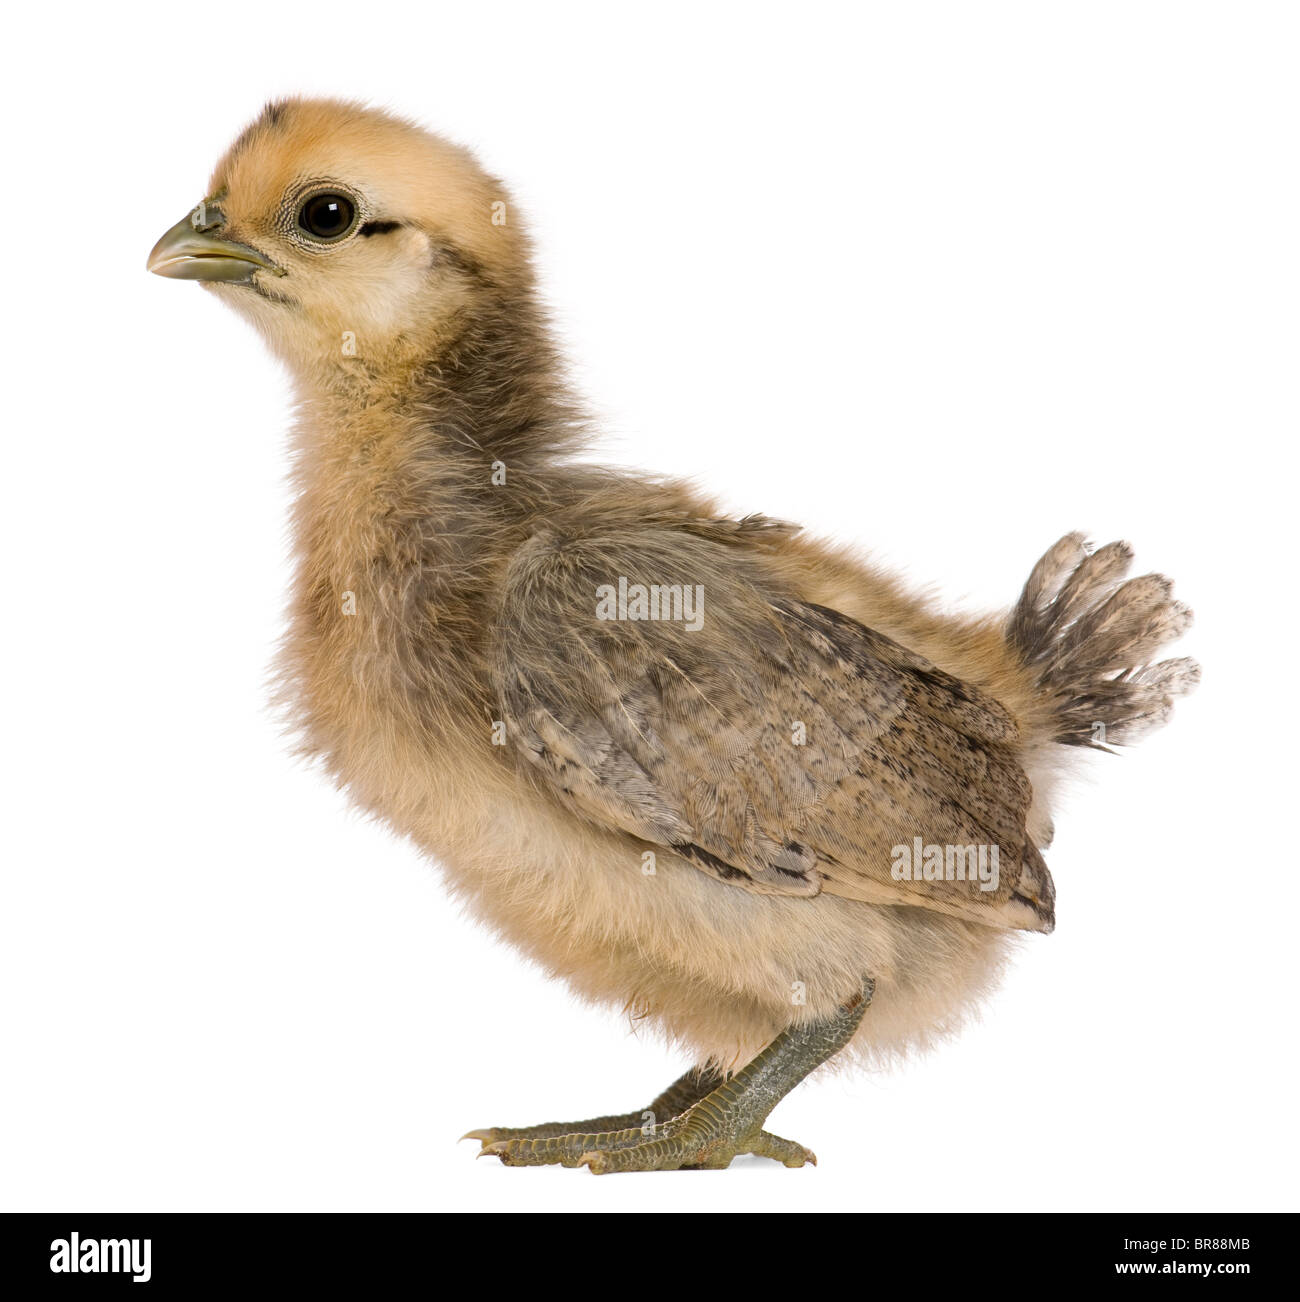 Chick, 3 weeks old, standing in front of white background Stock Photo